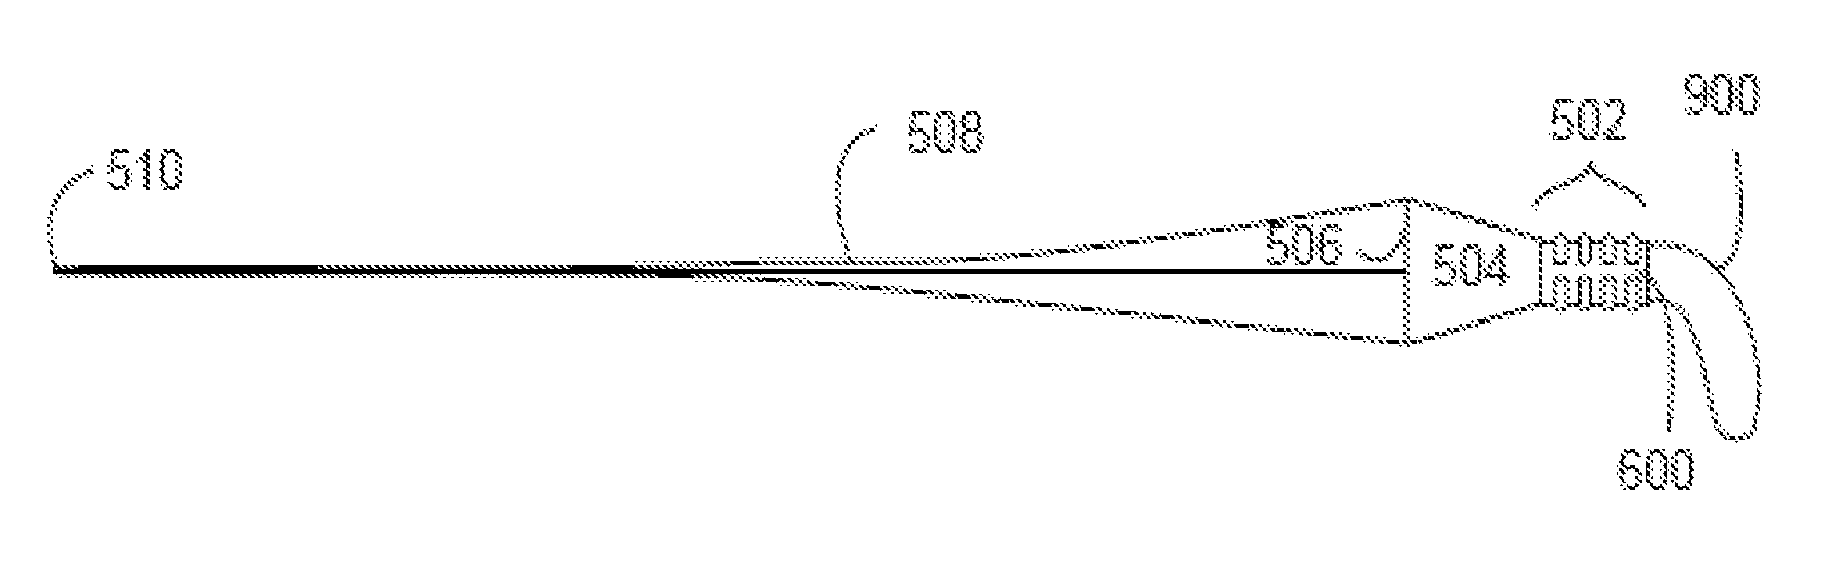 Apparatus and method for open thread, reusable, no-waste collapsible tube dispensers with control ribs and/or detent